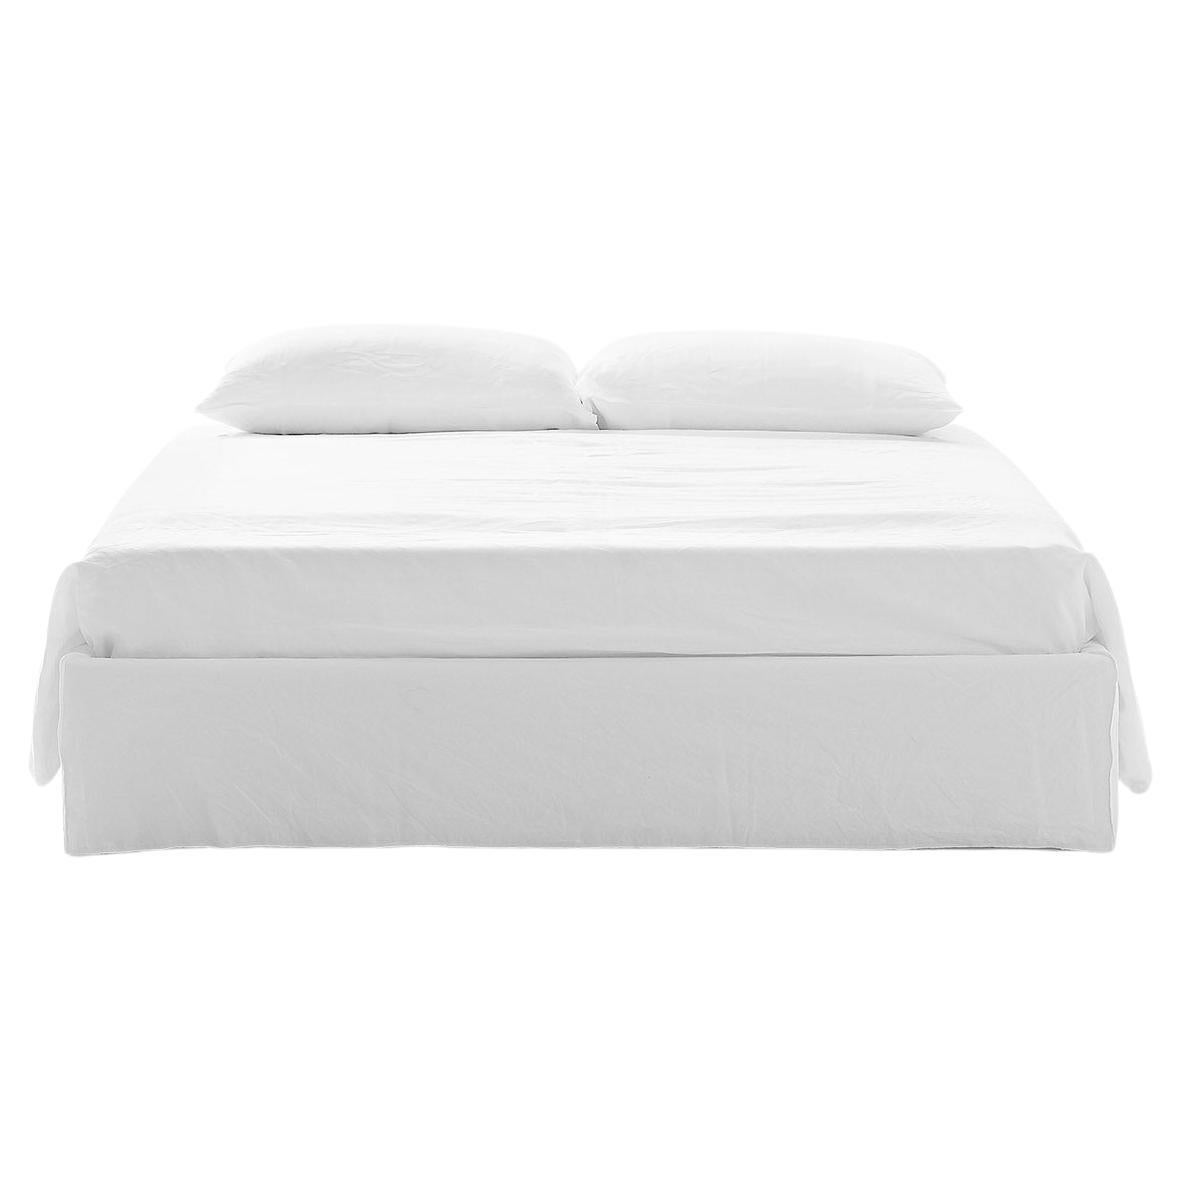 Gervasoni Ghost 80 SL Bed in White Linen Upholstery by Paola Navone